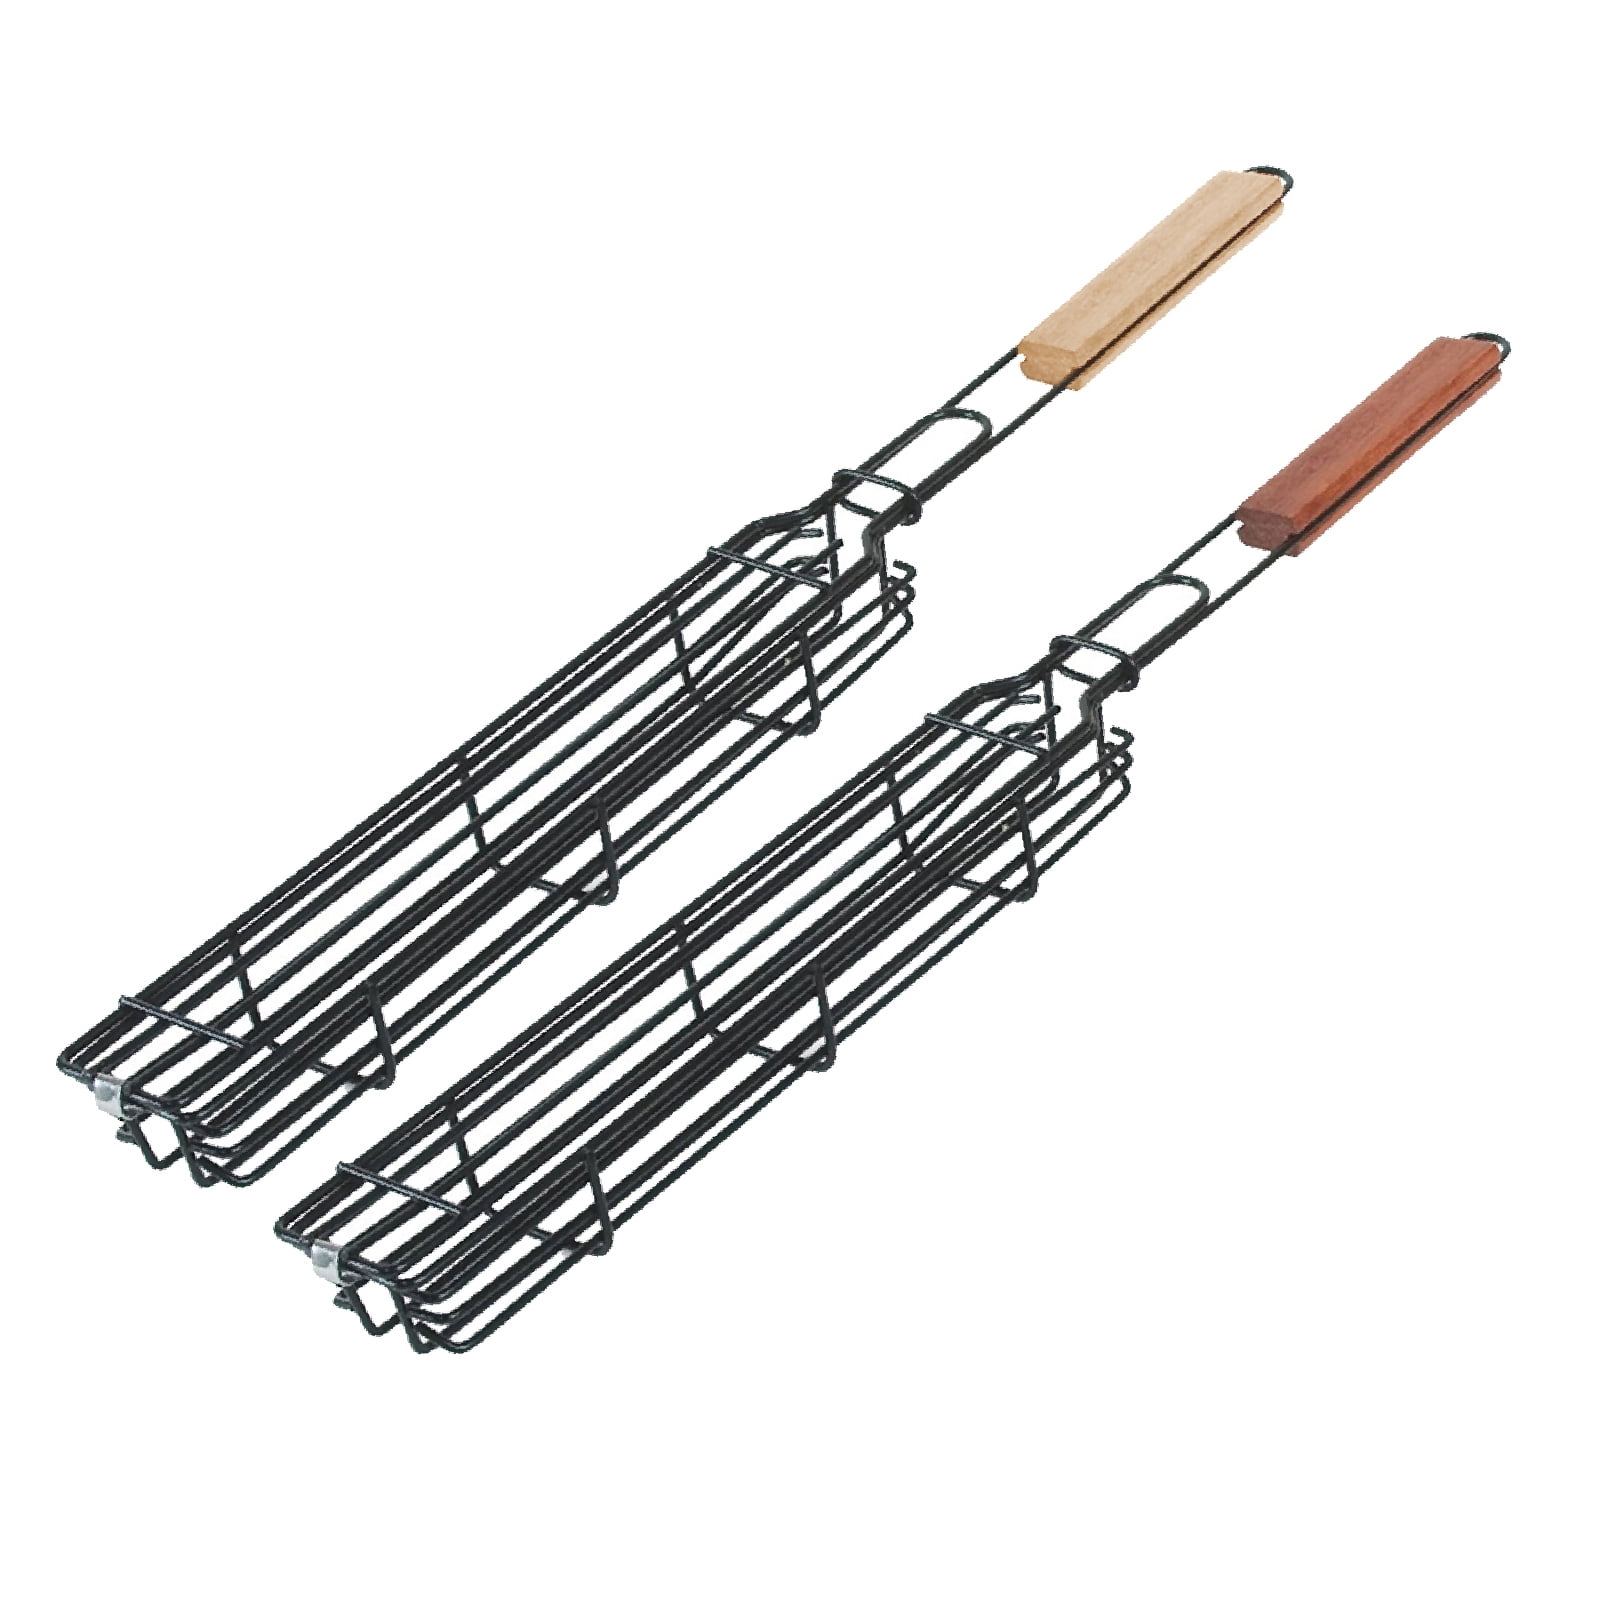 Charcoal Companion Kabob Grilling Baskets Nonstick Steel Stick Coating Set of 4 